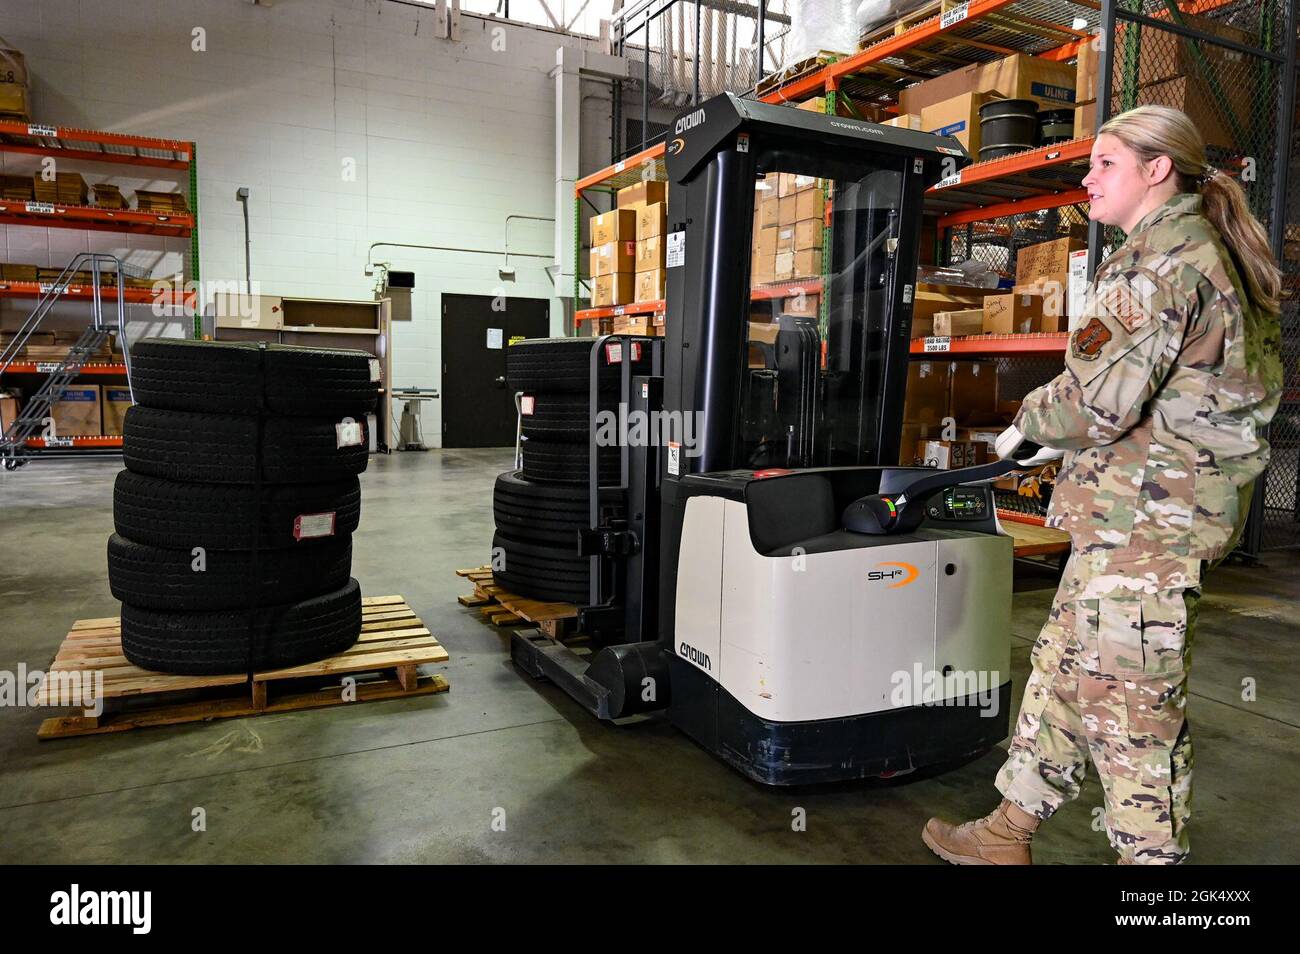 Senior Airman Sadie Vandersteen, 114th Logistics Readiness Squadron Traffic Management Office (TMO) specialist, operates a heavy duty Walkie Stacker while organizing shipments in the TMO warehouse at Joe Foss Field, S.D., Aug 2, 2021. The TMO is responsible for processing and managing cargo, as well as receiving supplies for the base, ensuring the South Dakota Air National Guard can fulfill its mission both in state and around the world. Stock Photo